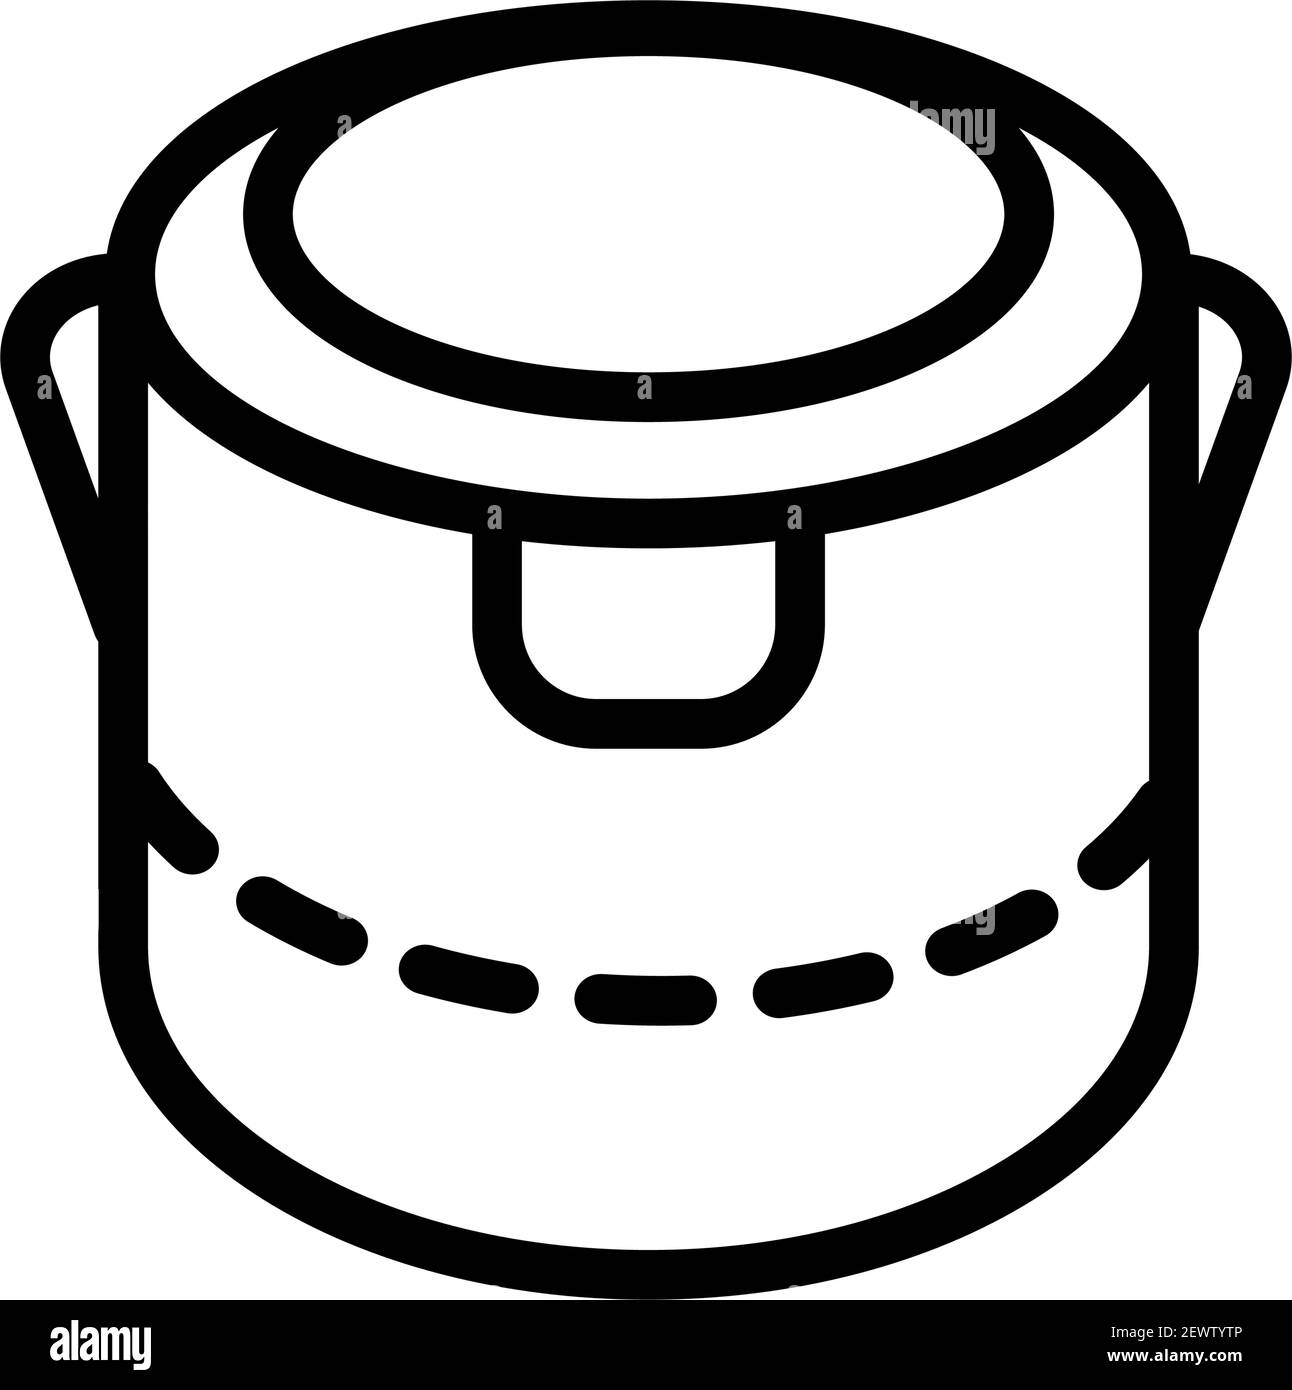 Lunchbox outline simple icon. Illustration of lunchbox icon vector for web design isolated on white Stock Vector